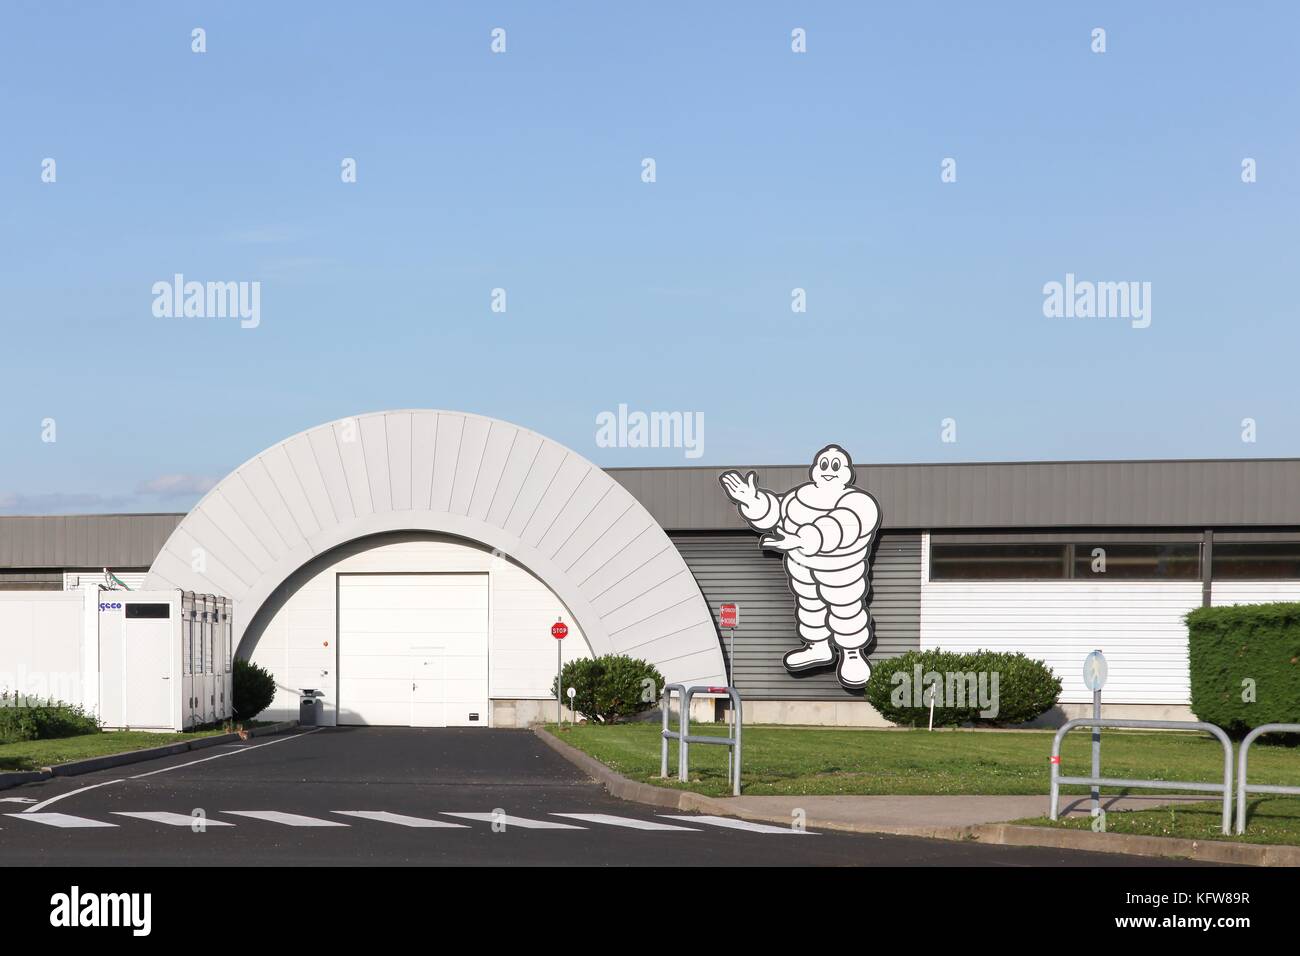 Clermont, France - June 7, 2017: Michelin factory in Clermont-Ferrand. Michelin is a tire manufacturer based in Clermont-Ferrand Stock Photo